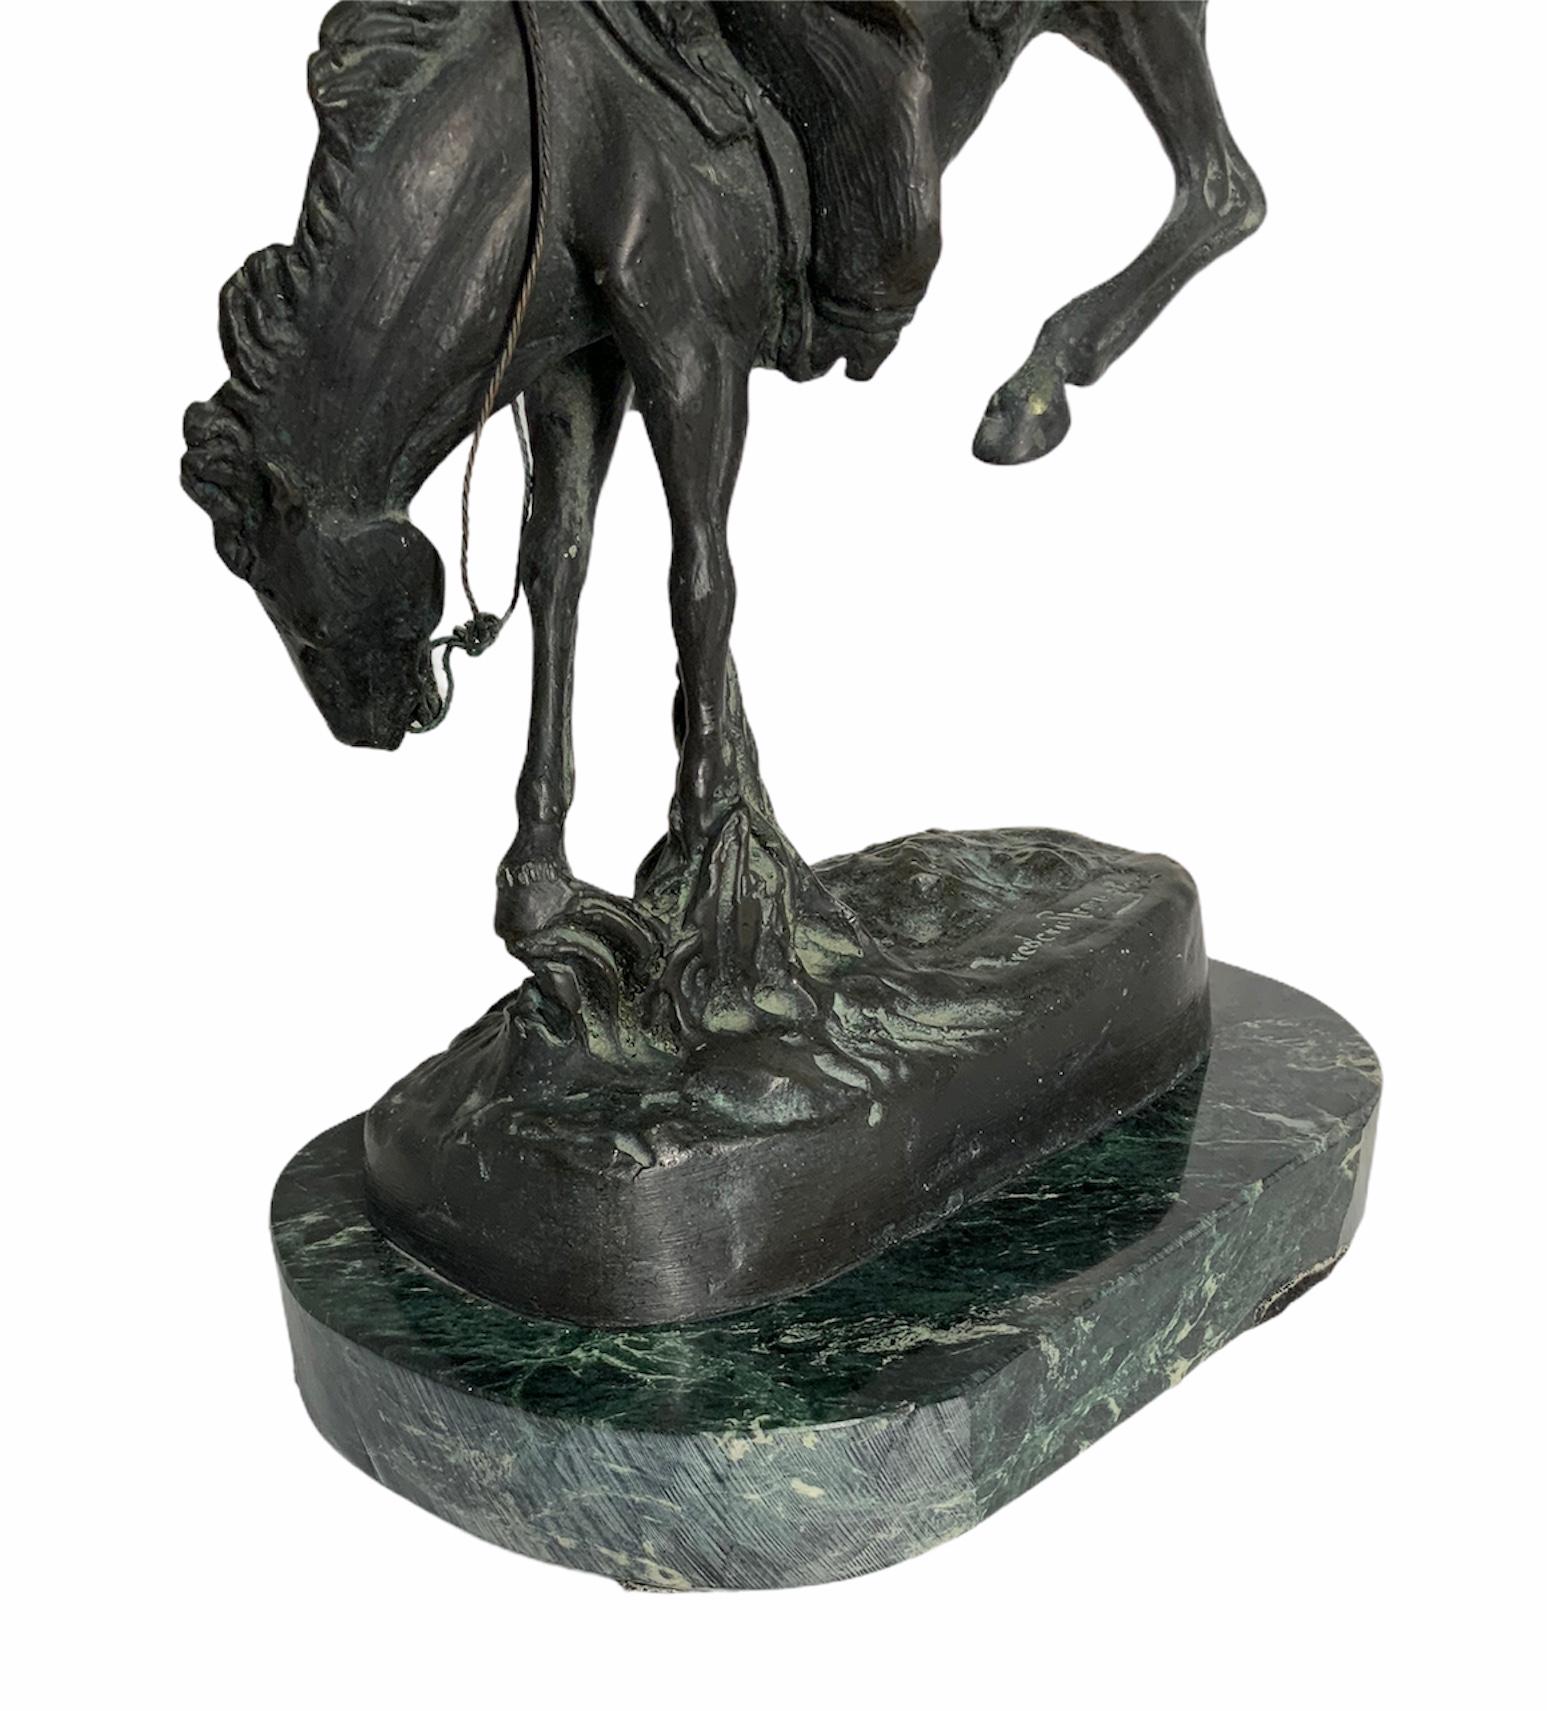 20th Century Frederic Remington Patinated Bronze Sculpture “The Outlaw”